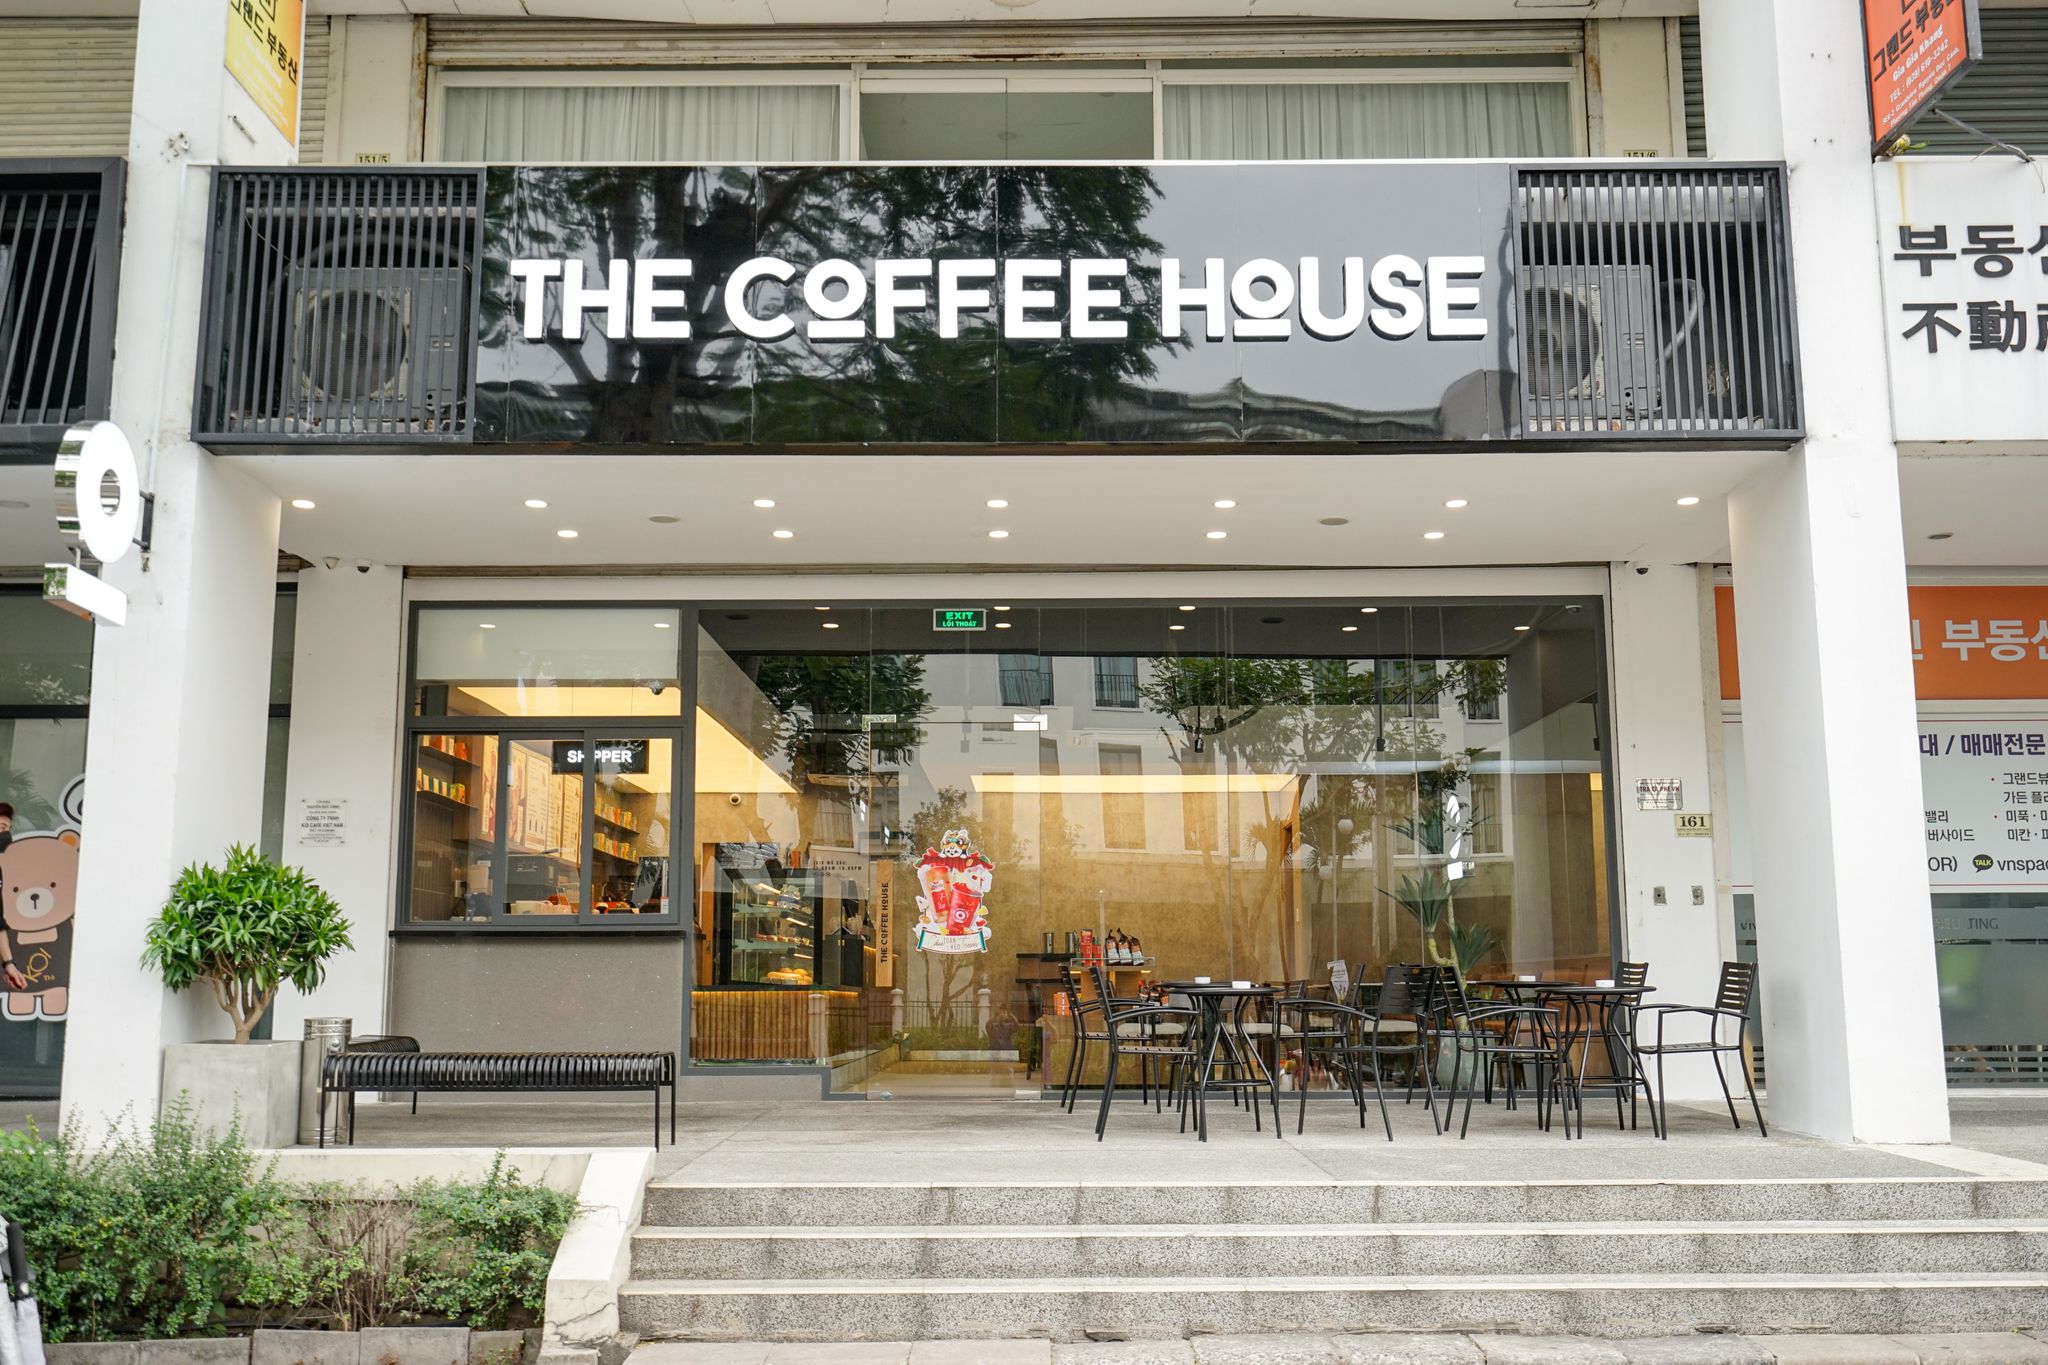 The Coffee House - Delivery 1800 6936